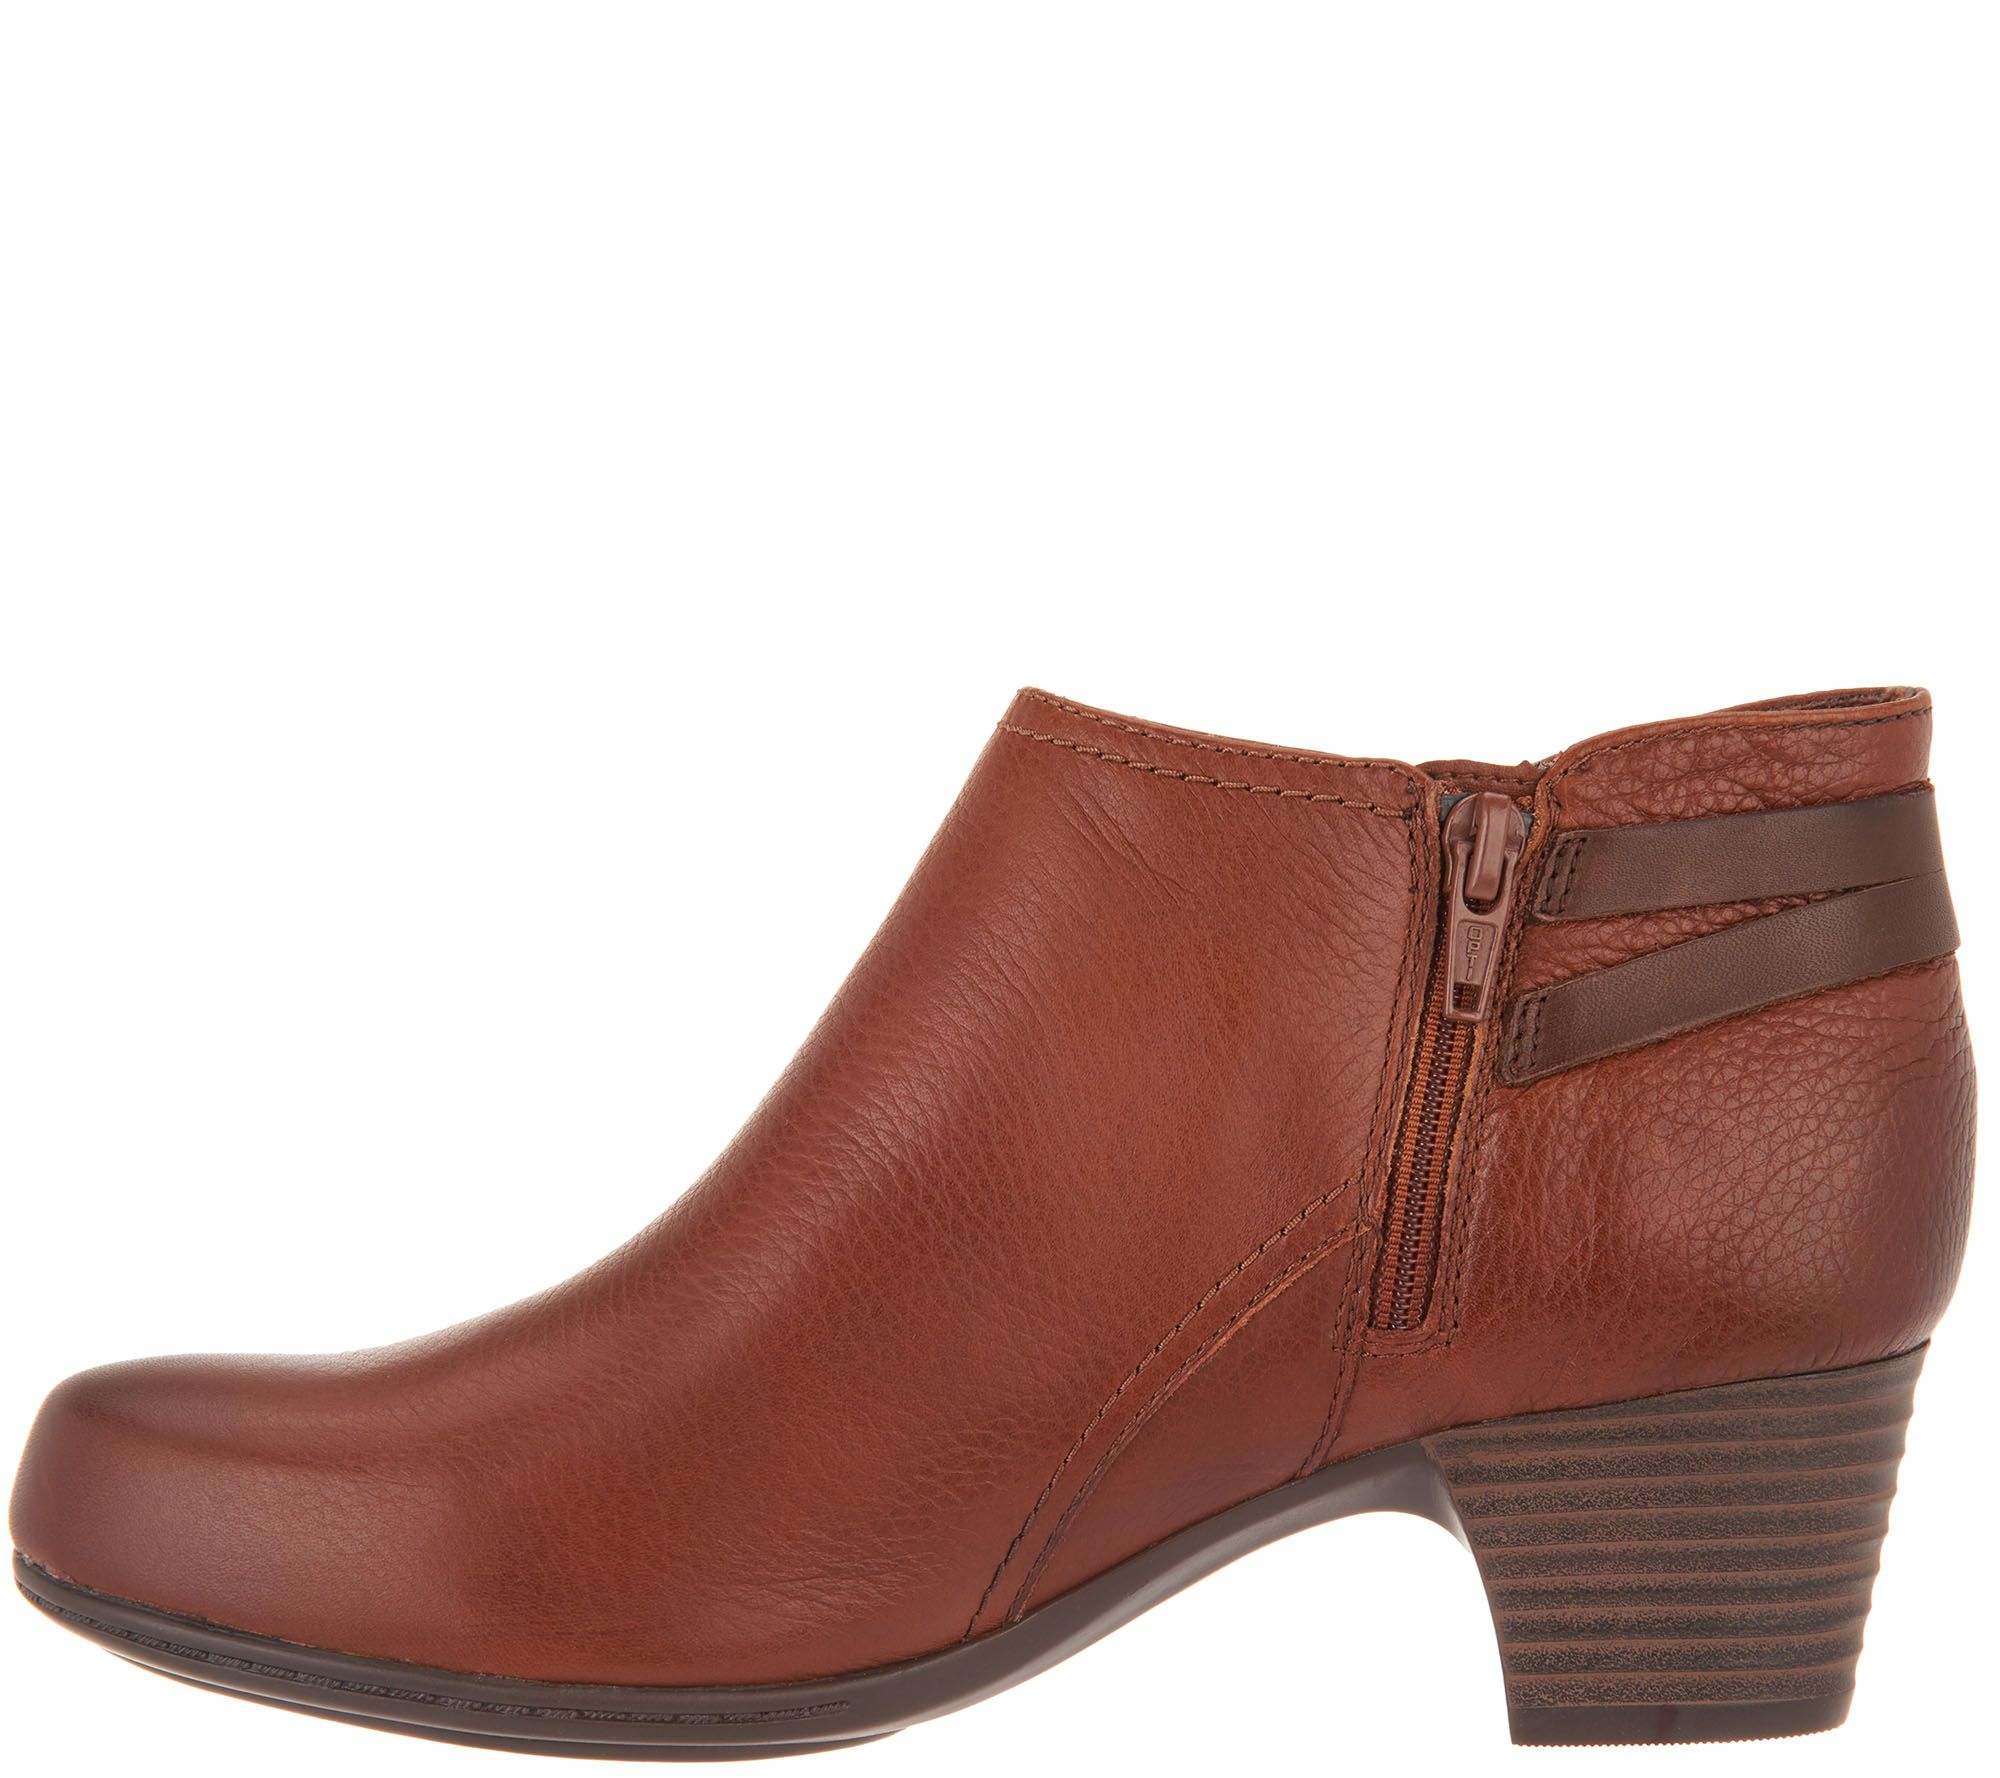 clarks valarie 2 ashly women's ankle boots